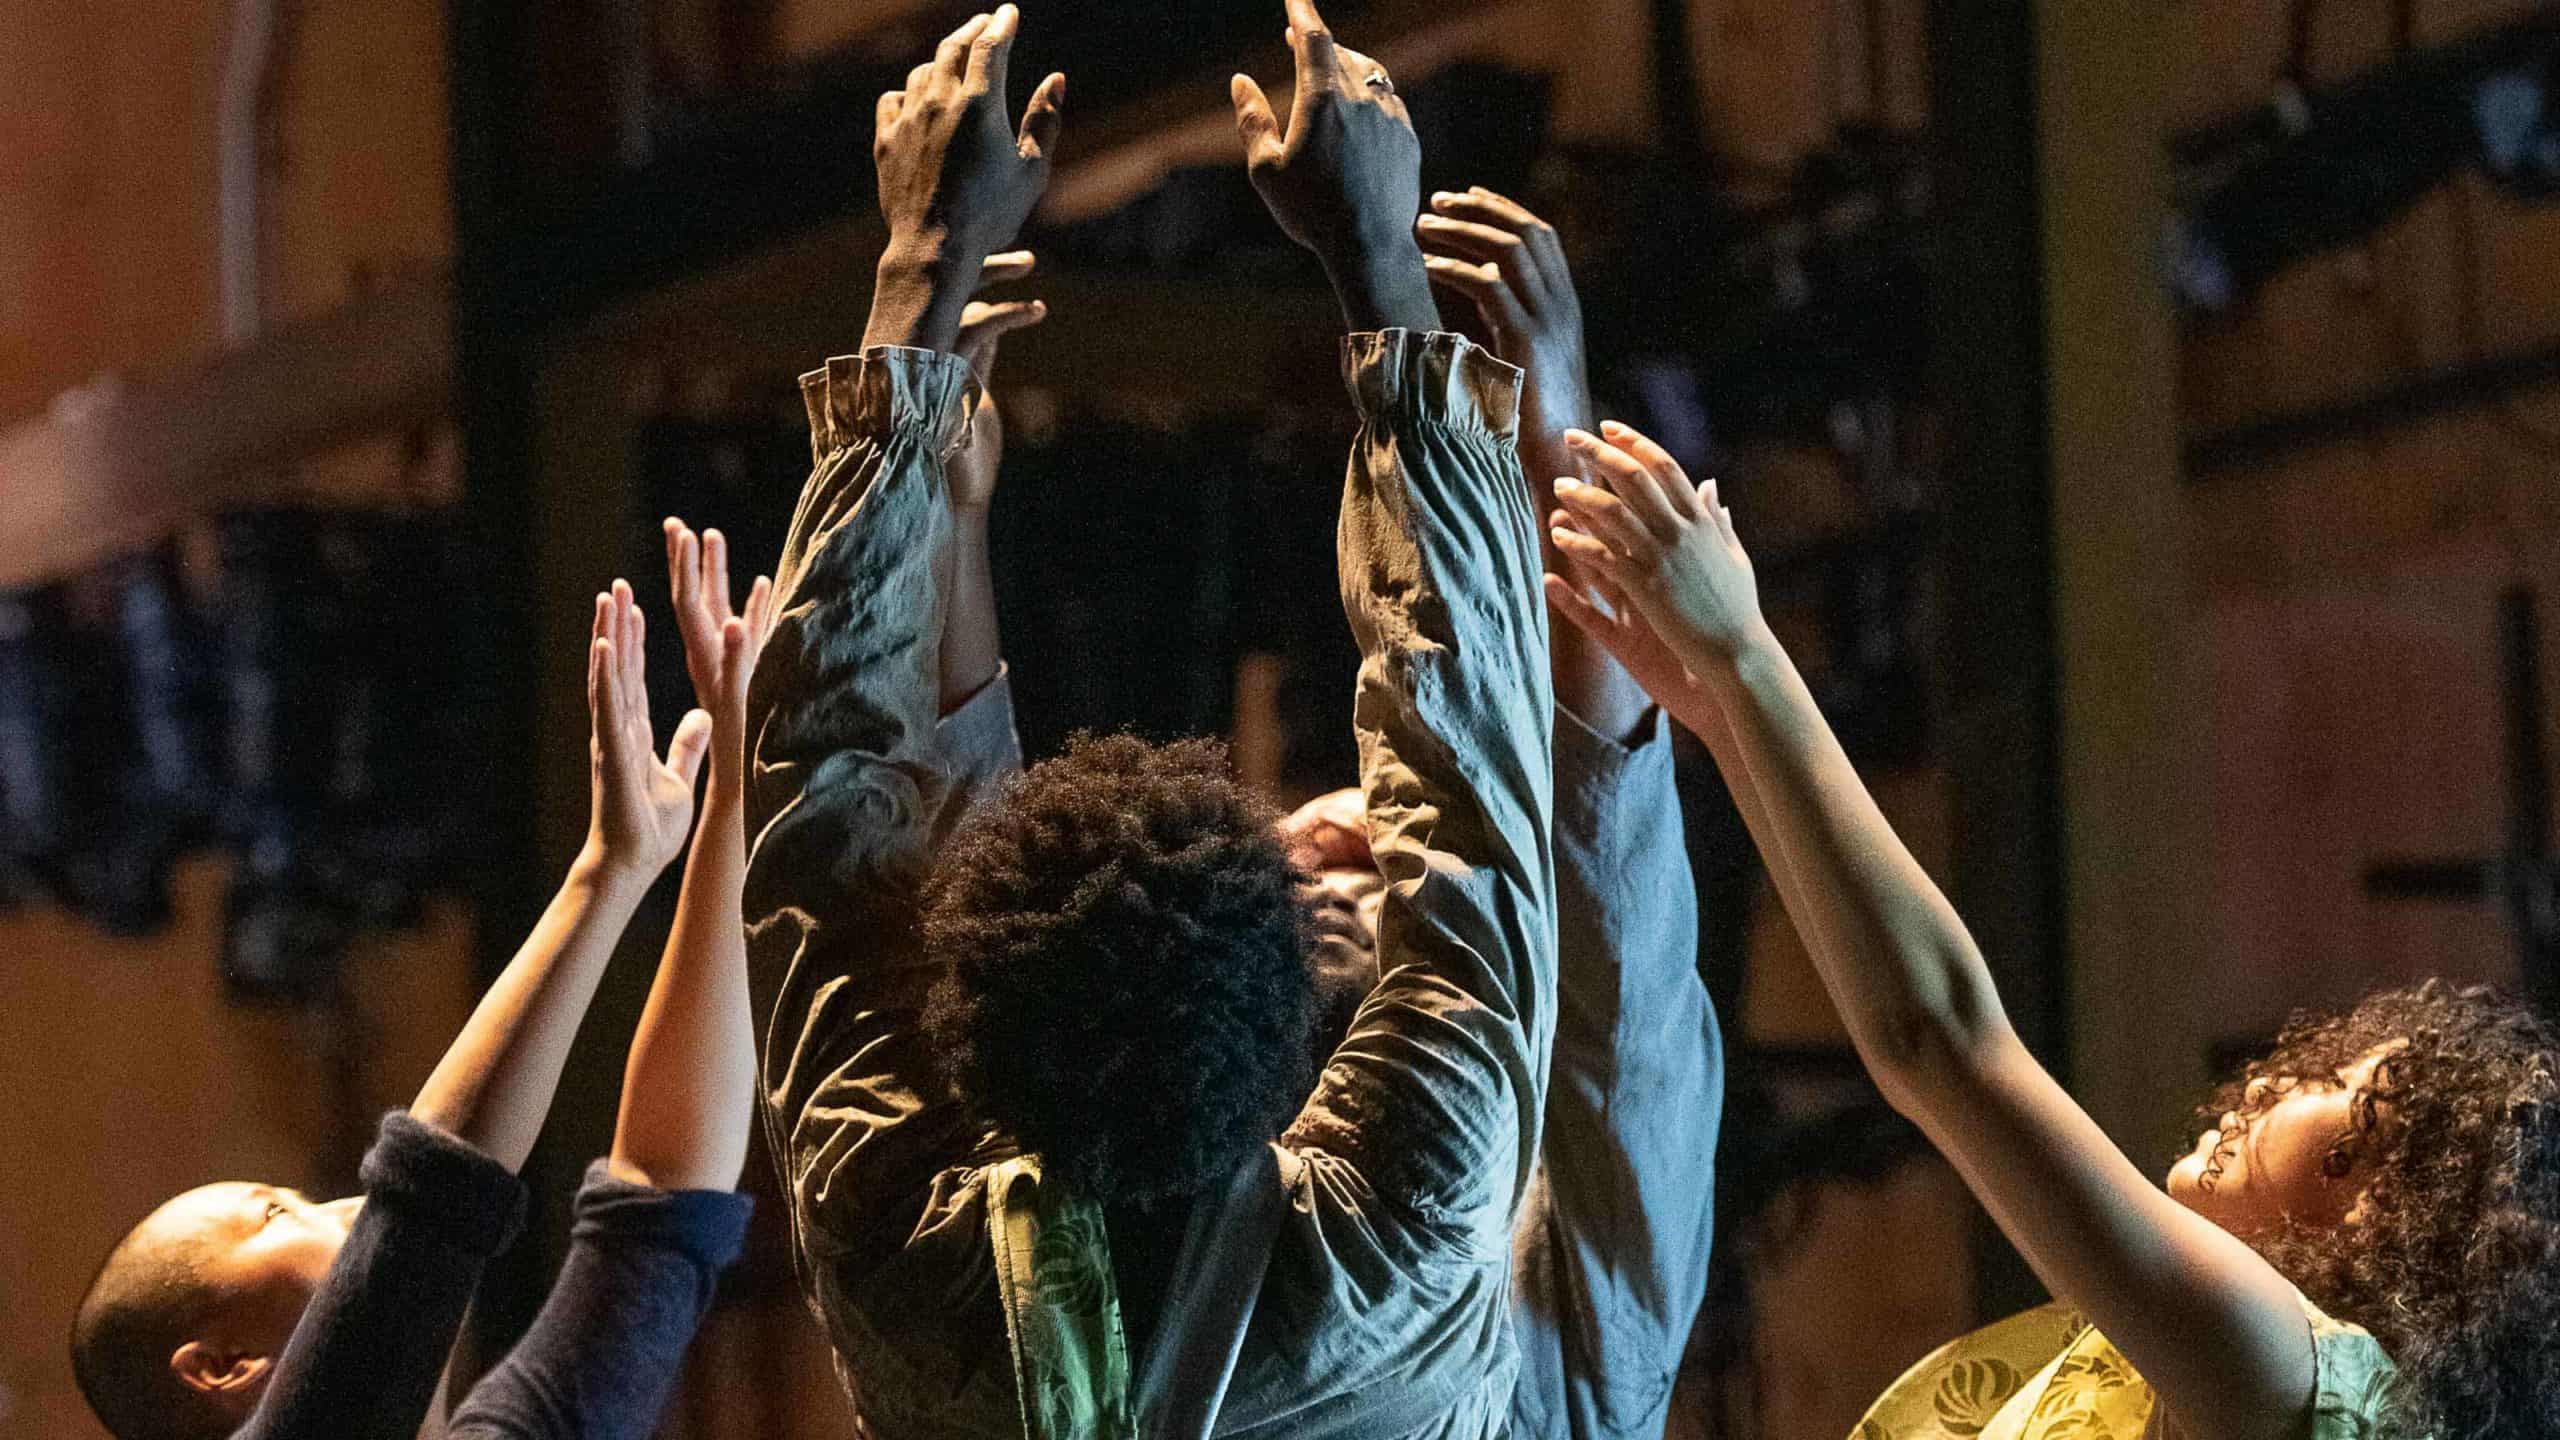 Reggie Wilson's Fist and Heel performance group will premiere Power, a new work inspired by black Shaker dance, at Jacob's Pillow International Dance Festival in 2019.